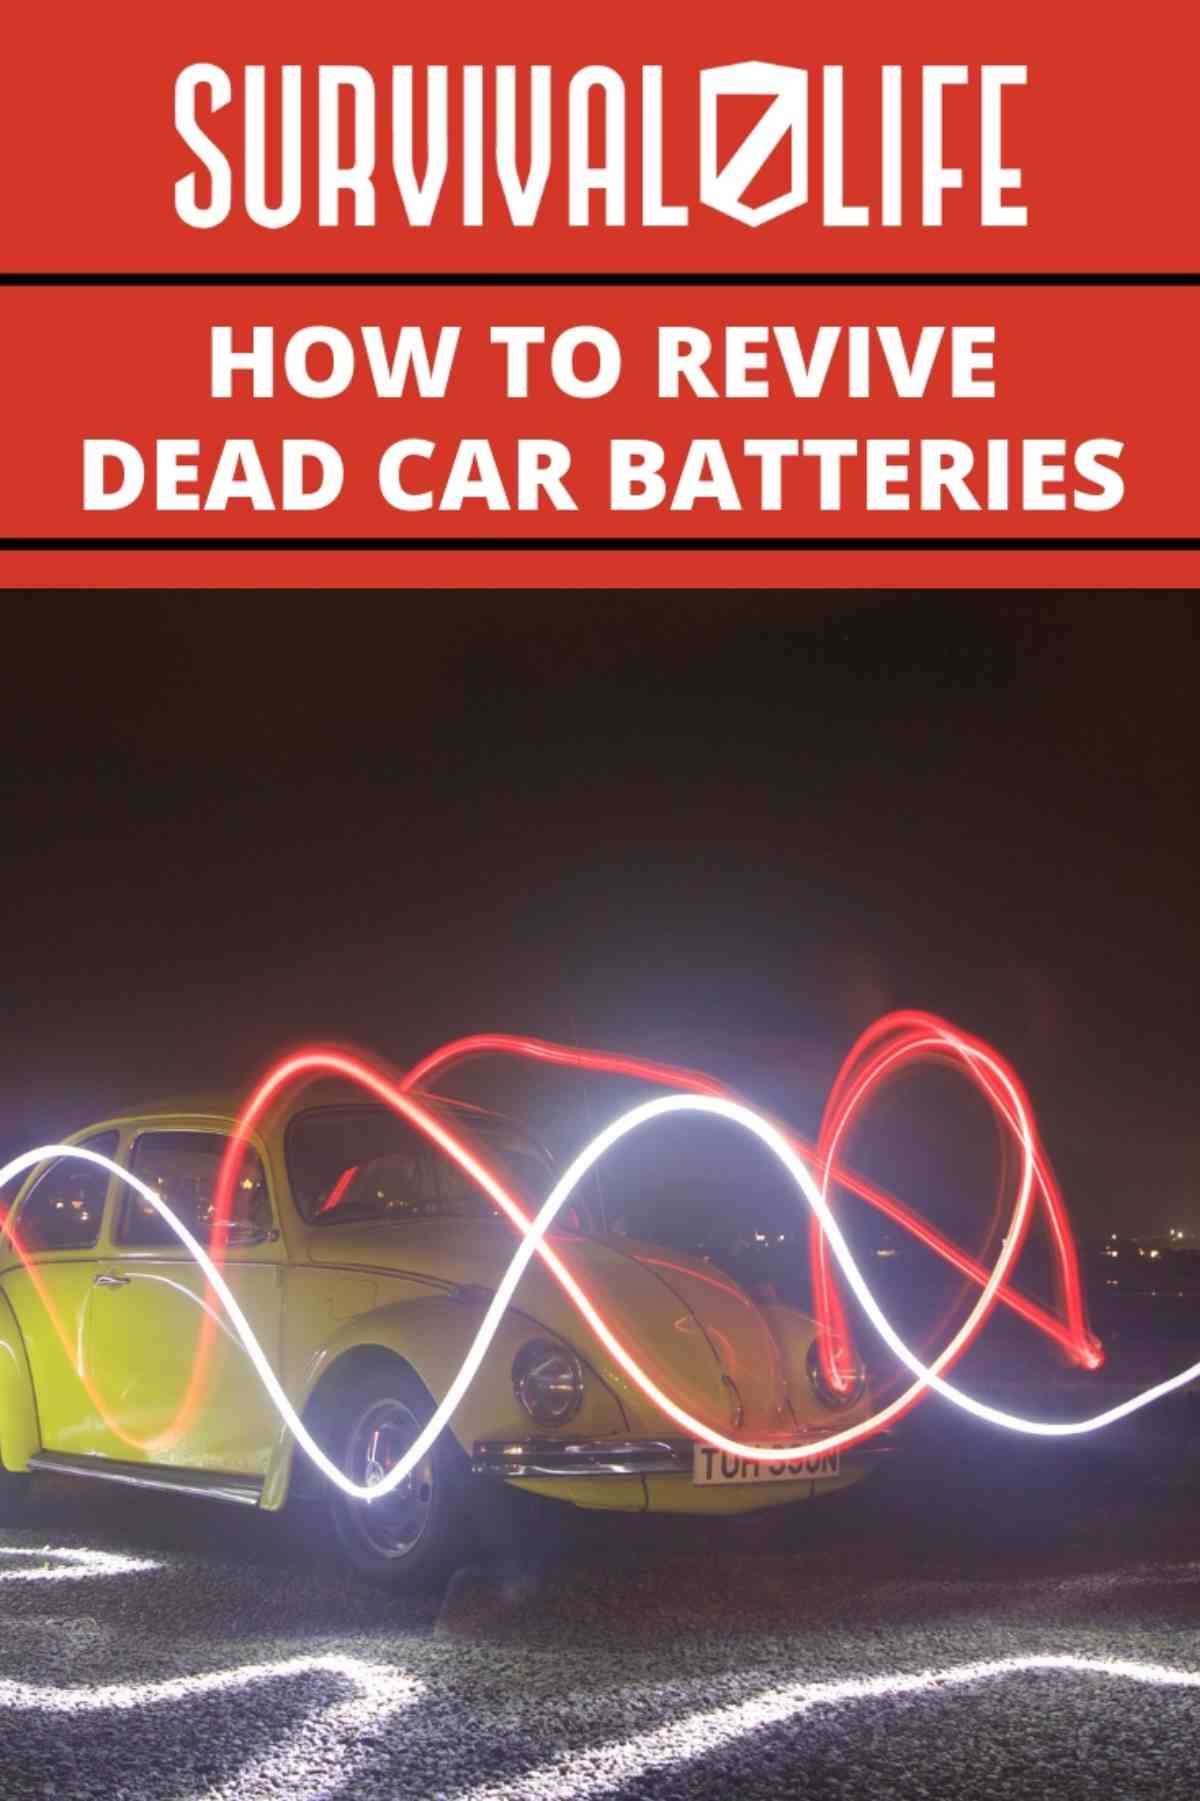 How To Revive Car Batteries: Don't Throw Dead Batteries Just Yet 